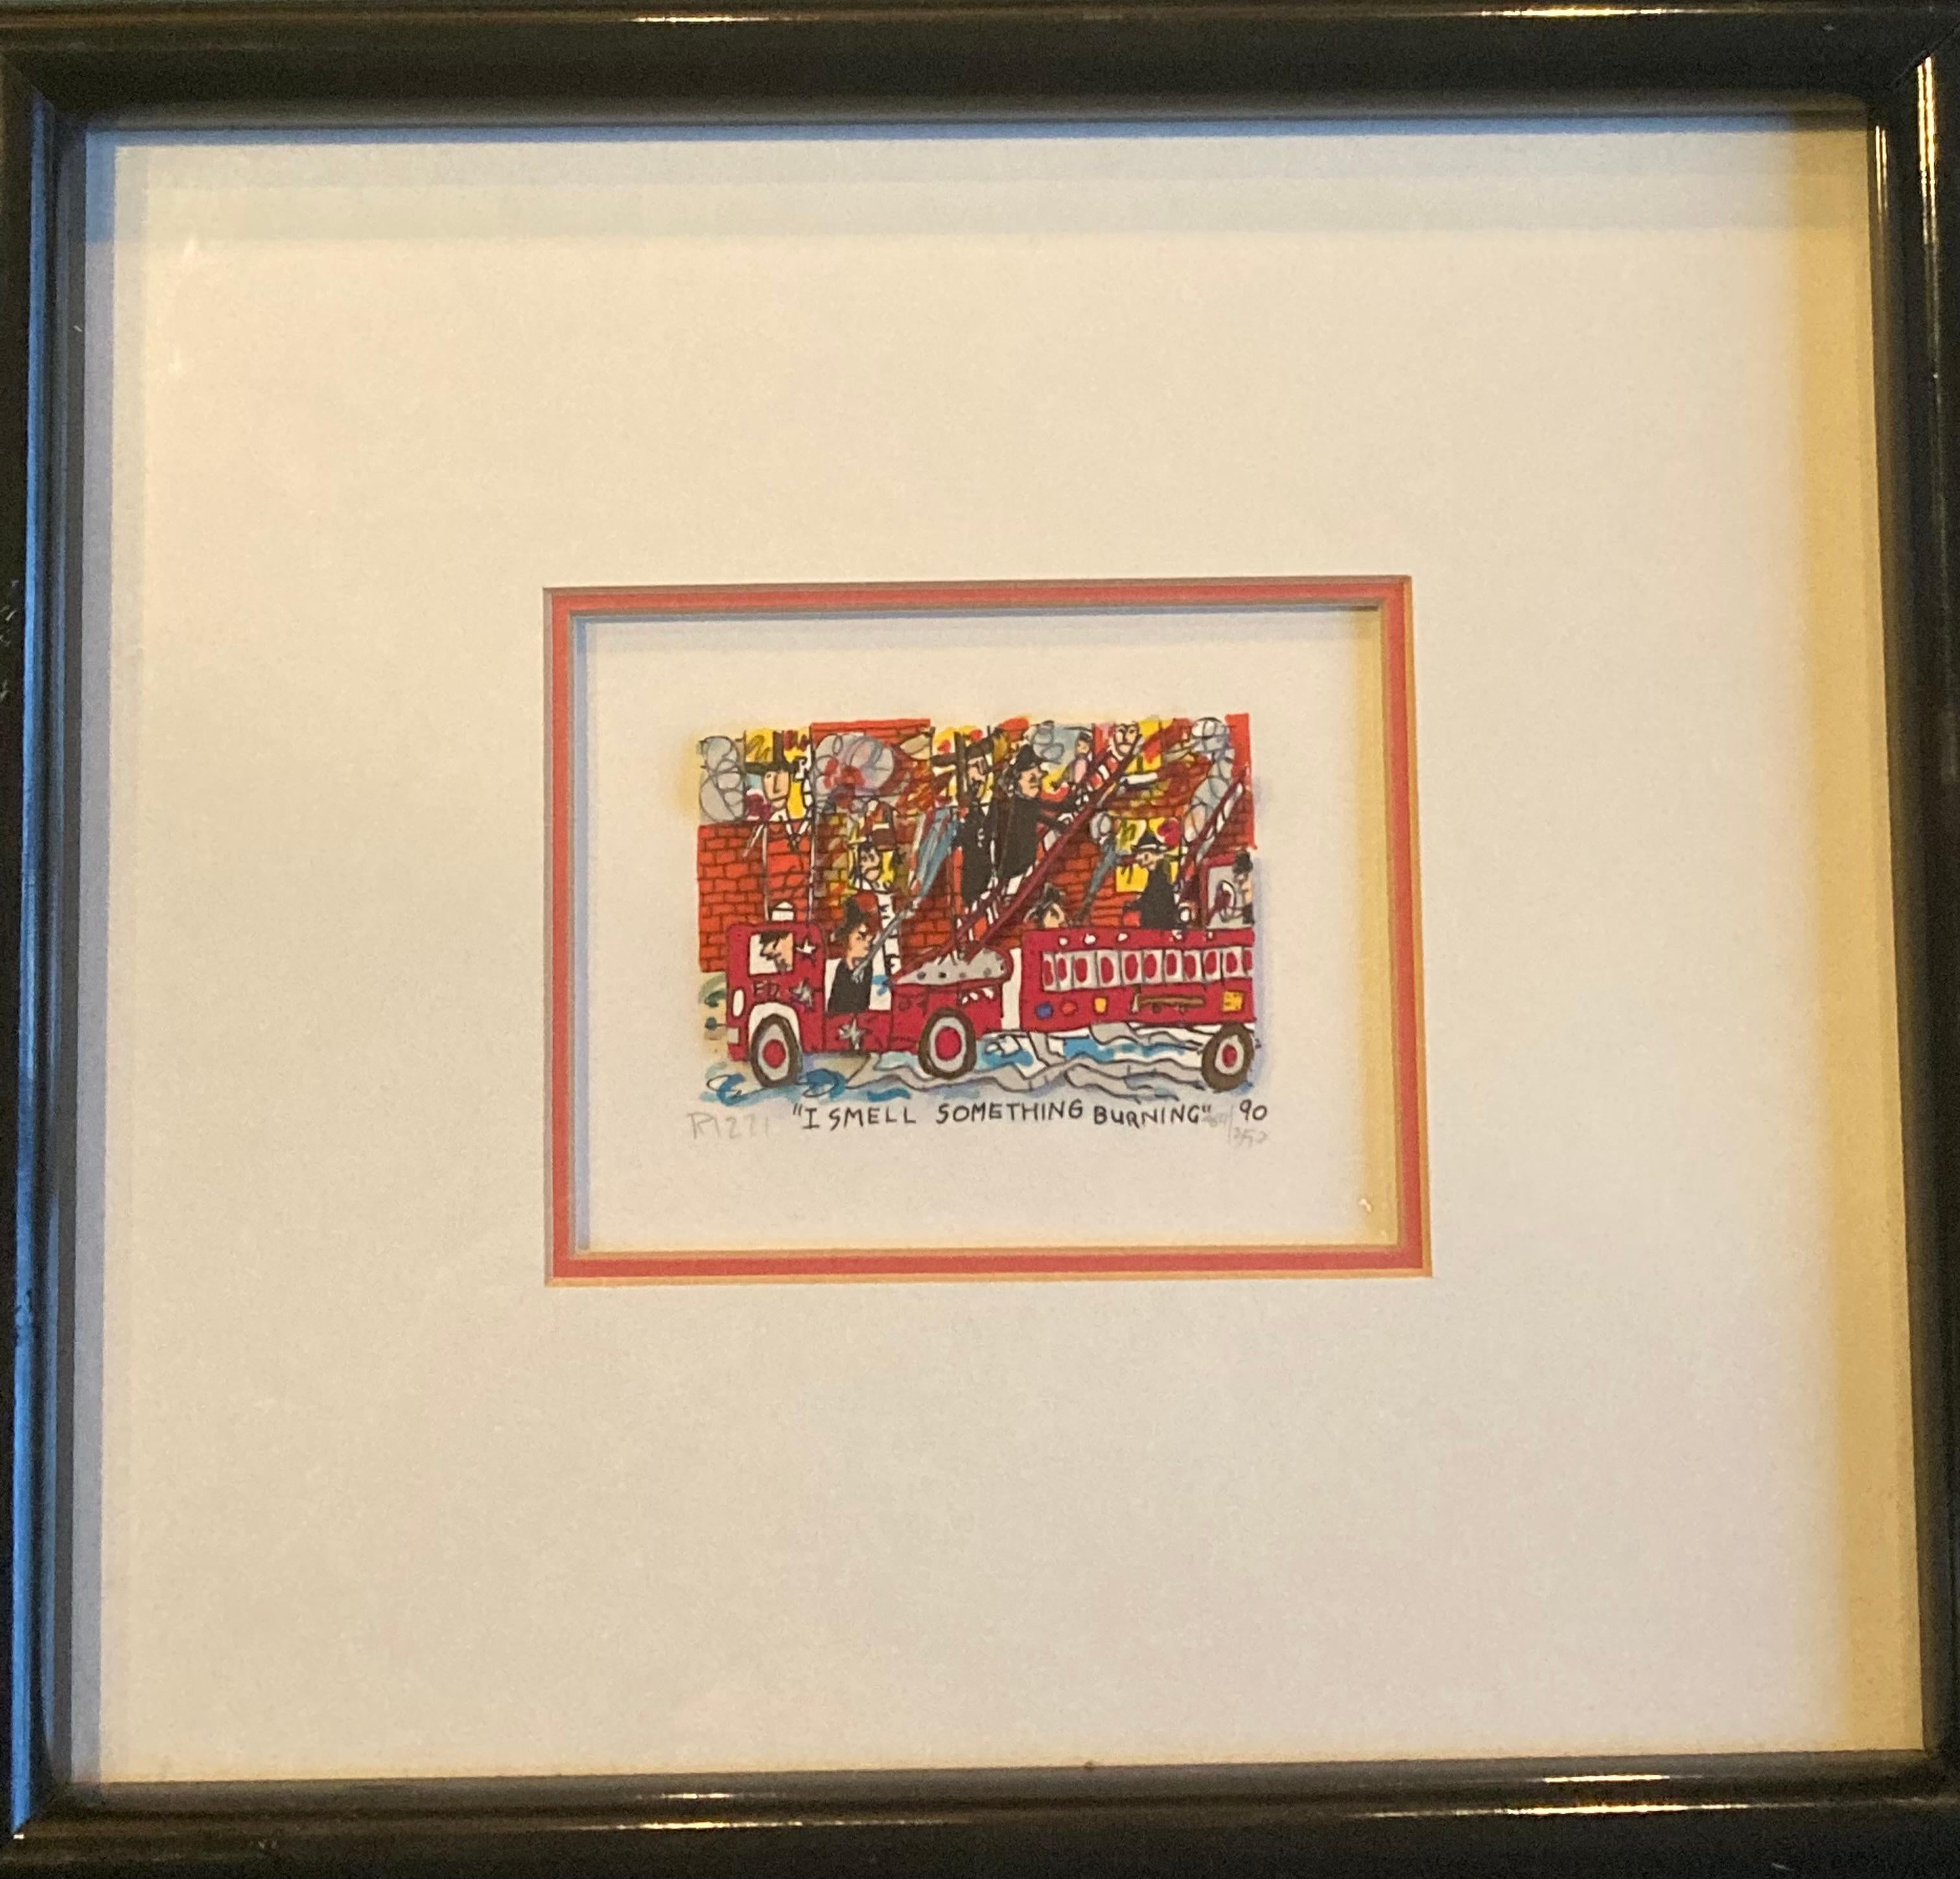 "I smell something burning" - Print by James Rizzi